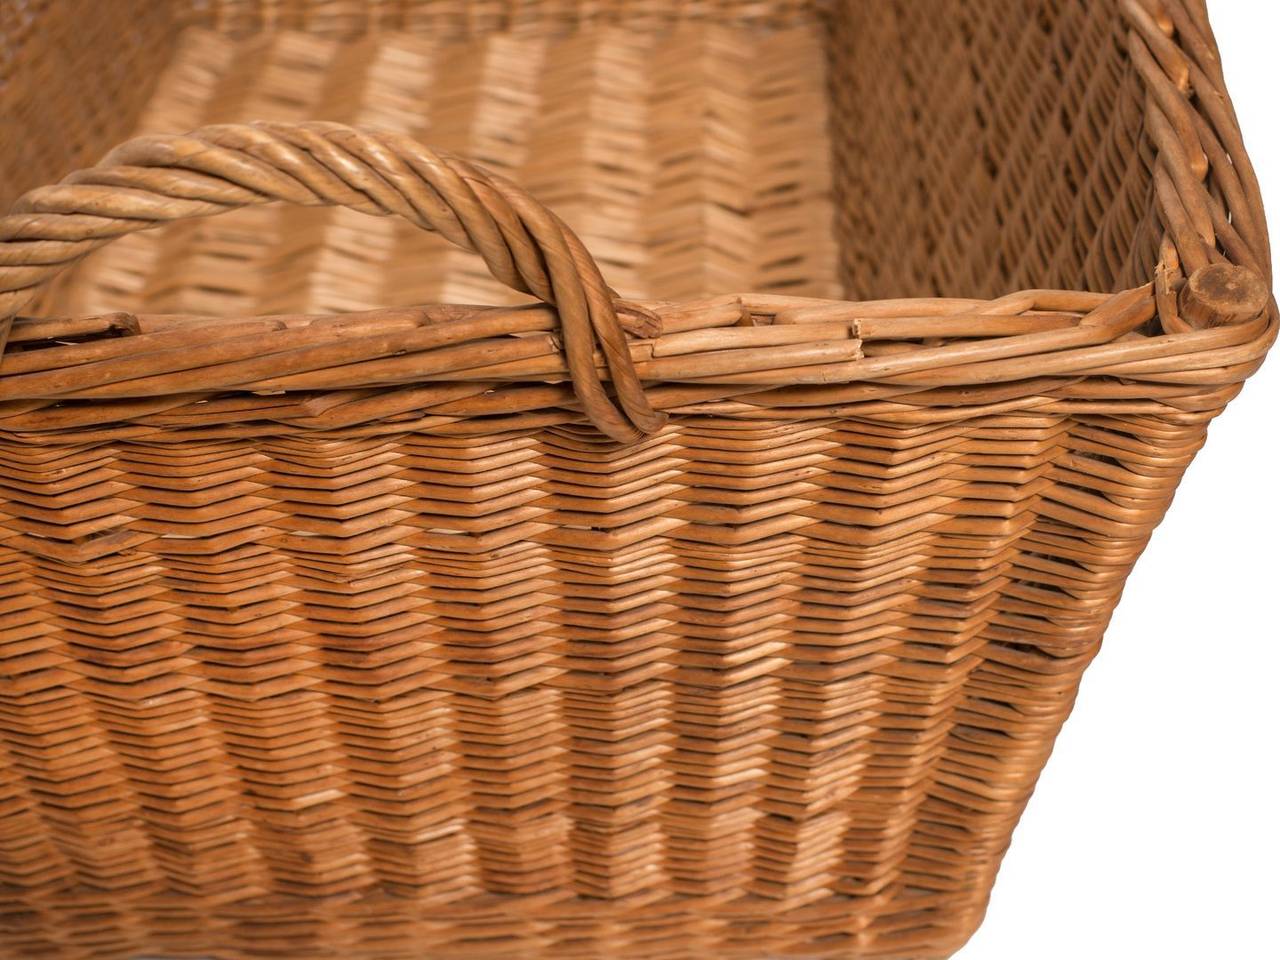 Handwoven Country French Basket 1